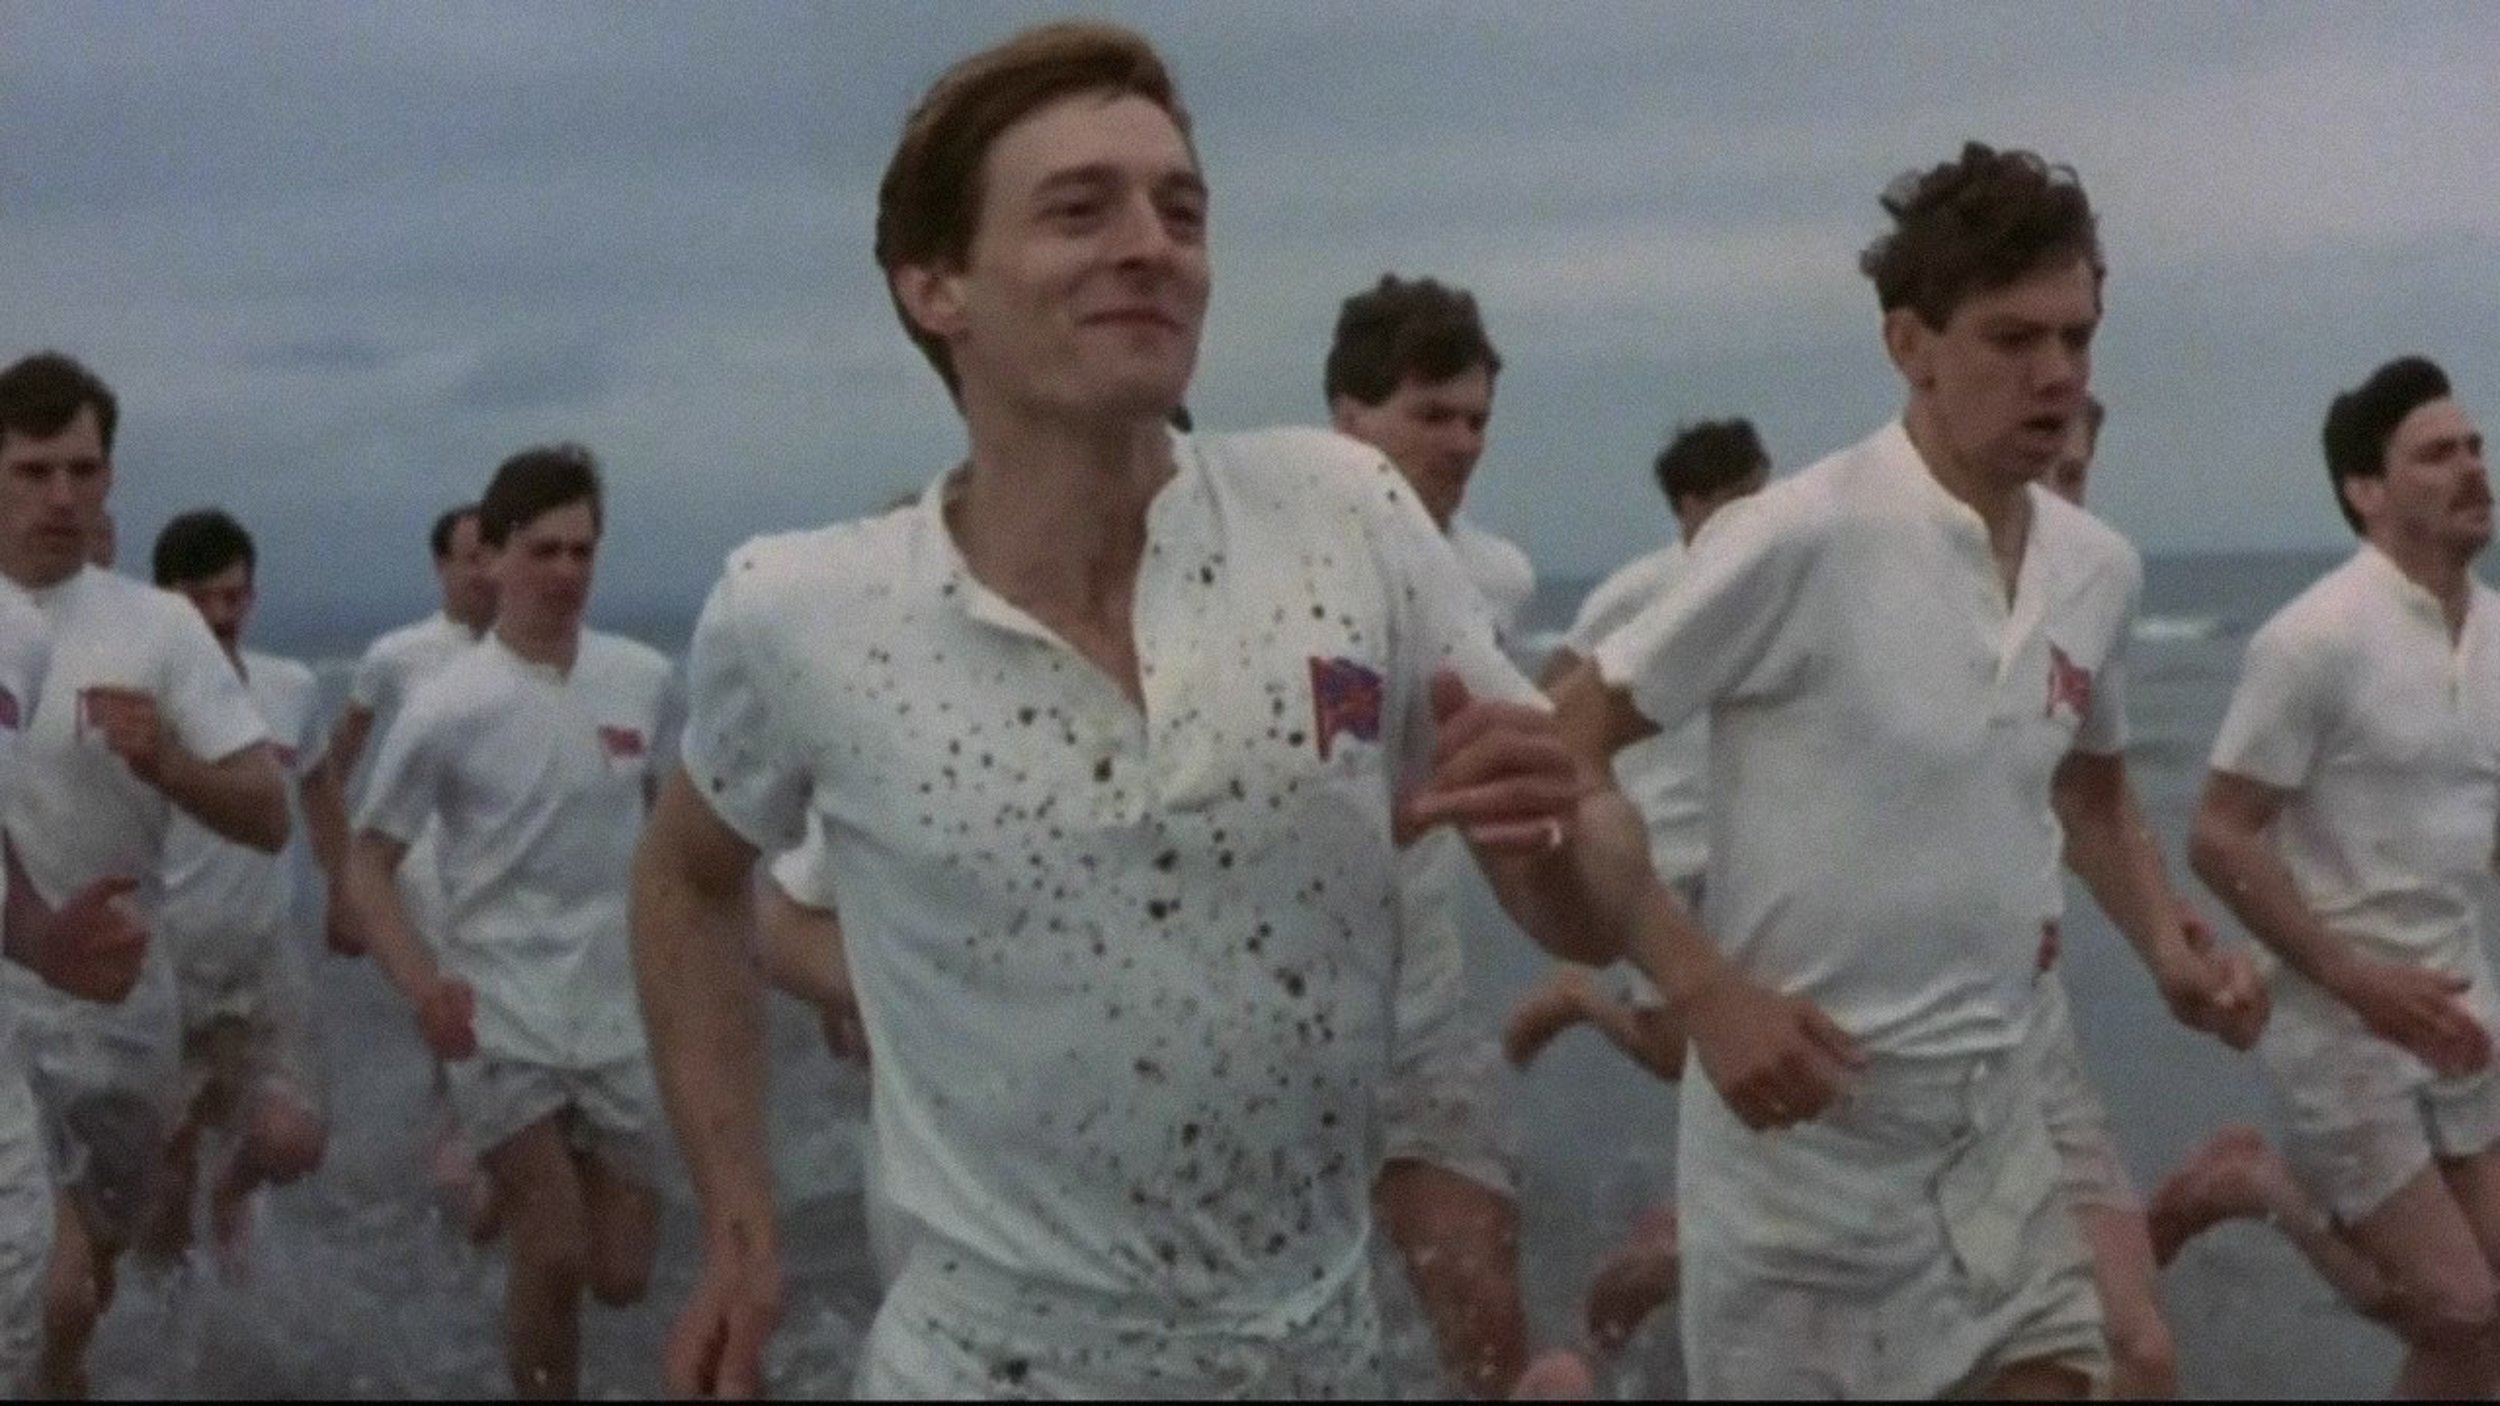 <p>“Chariots of Fire” is a sports movie that was so well-received that it won Best Picture at the Oscars. That’s impressive, but from a “sports movie” perspective it lacks a bit. After all, it’s a British period piece about two runners at the 1924 Olympics, with everything that “British period piece” entails. So don’t expect a lot of rip-roaring action scenes.</p><p>You may also like: <a href='https://www.yardbarker.com/college_football/articles/the_20_most_underrated_college_football_stadiums_013024/s1__39501417'>The 20 most underrated college football stadiums</a></p>